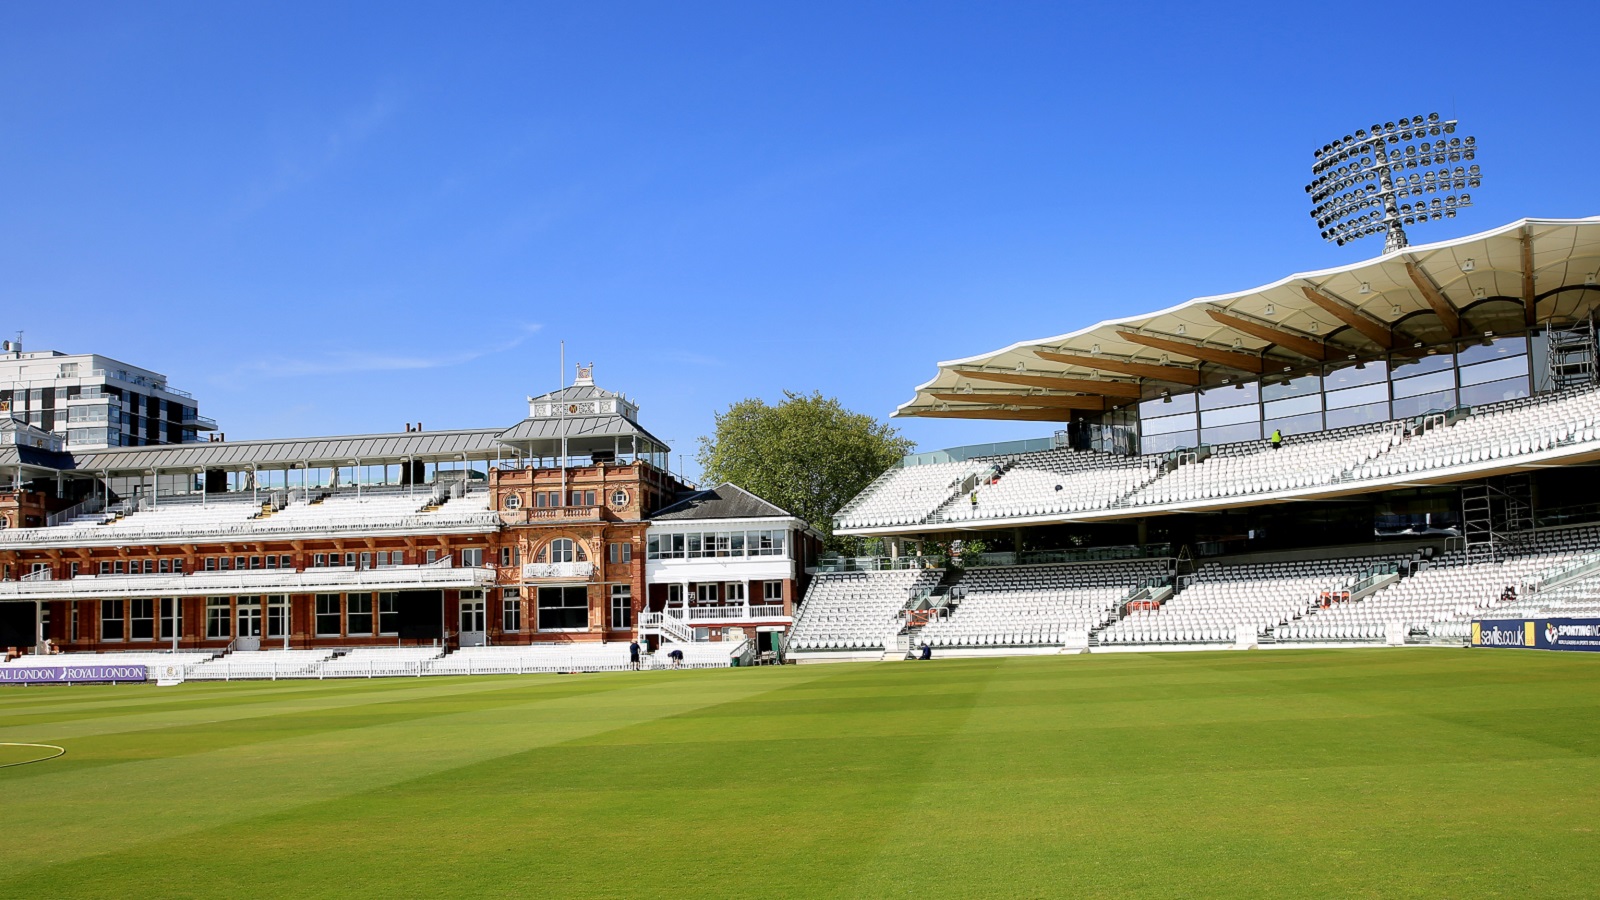 The Warner Stand at Lord's Cricket Ground